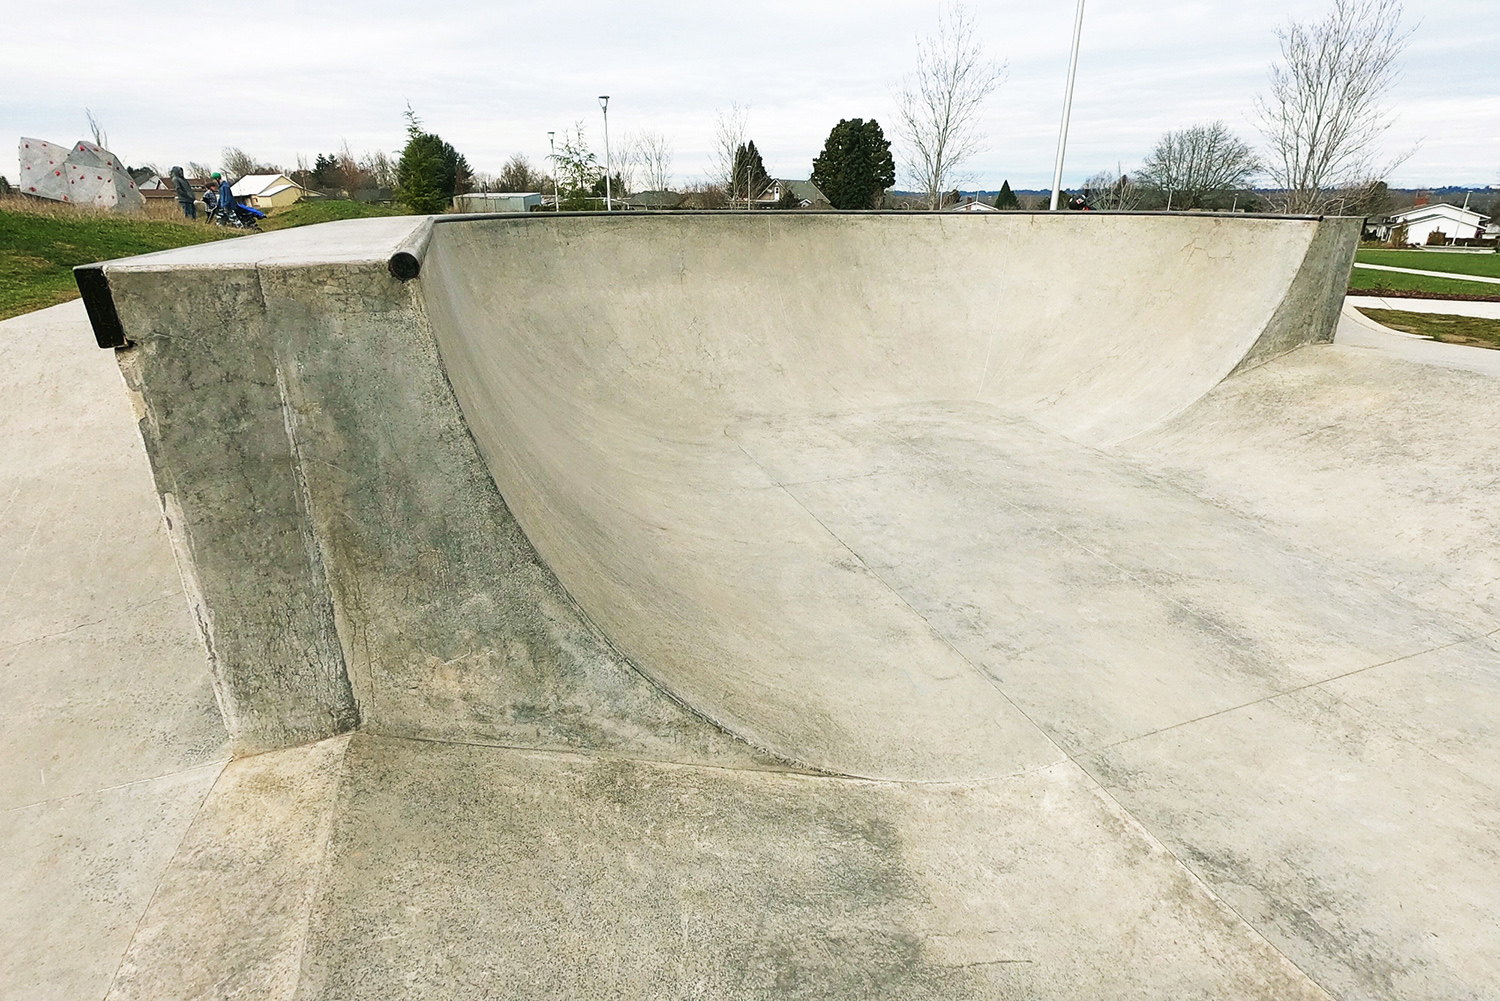  The six-foot deep bowl section of the Luuwit Skate Spot. 